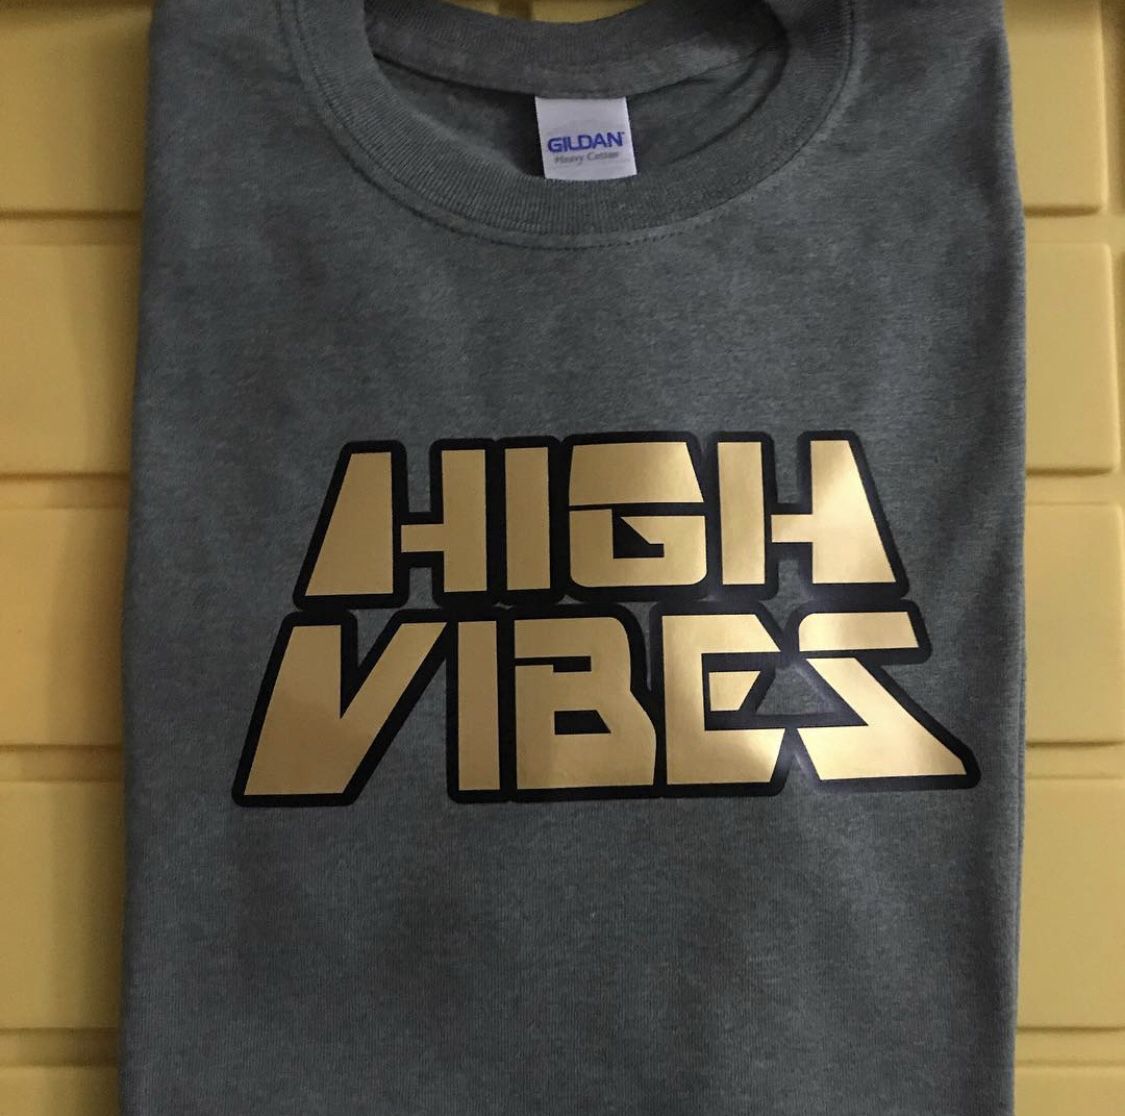 High Vibes t shirt Gray with Black and gold htv